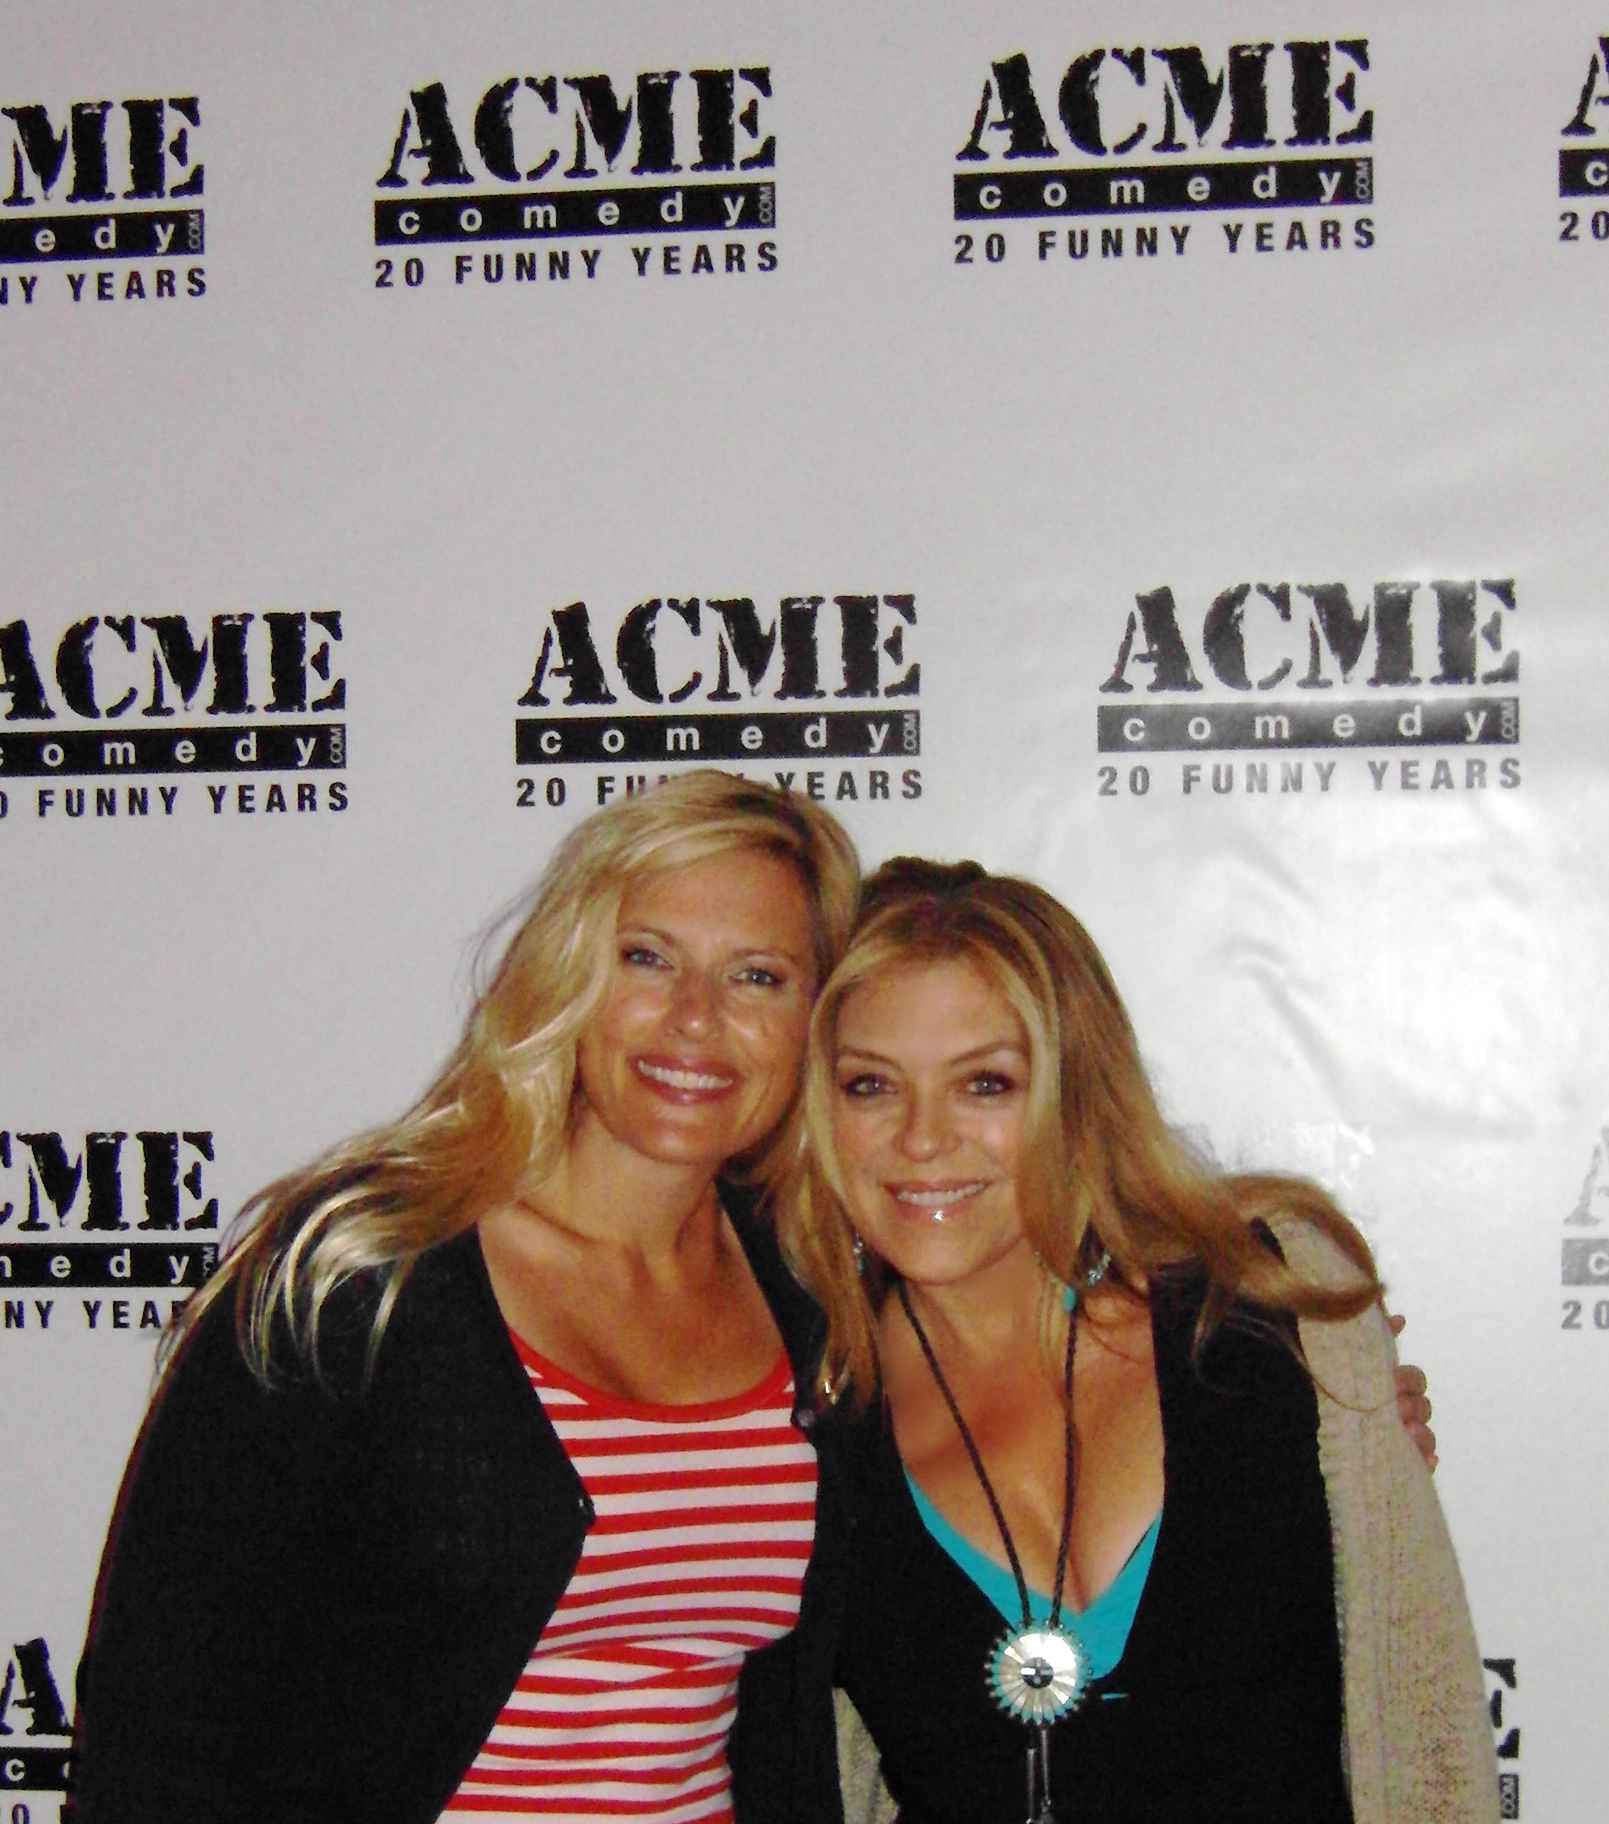 L to R: Brenda Epperson, Lydia Cornell at ACME COMEDY THEATER